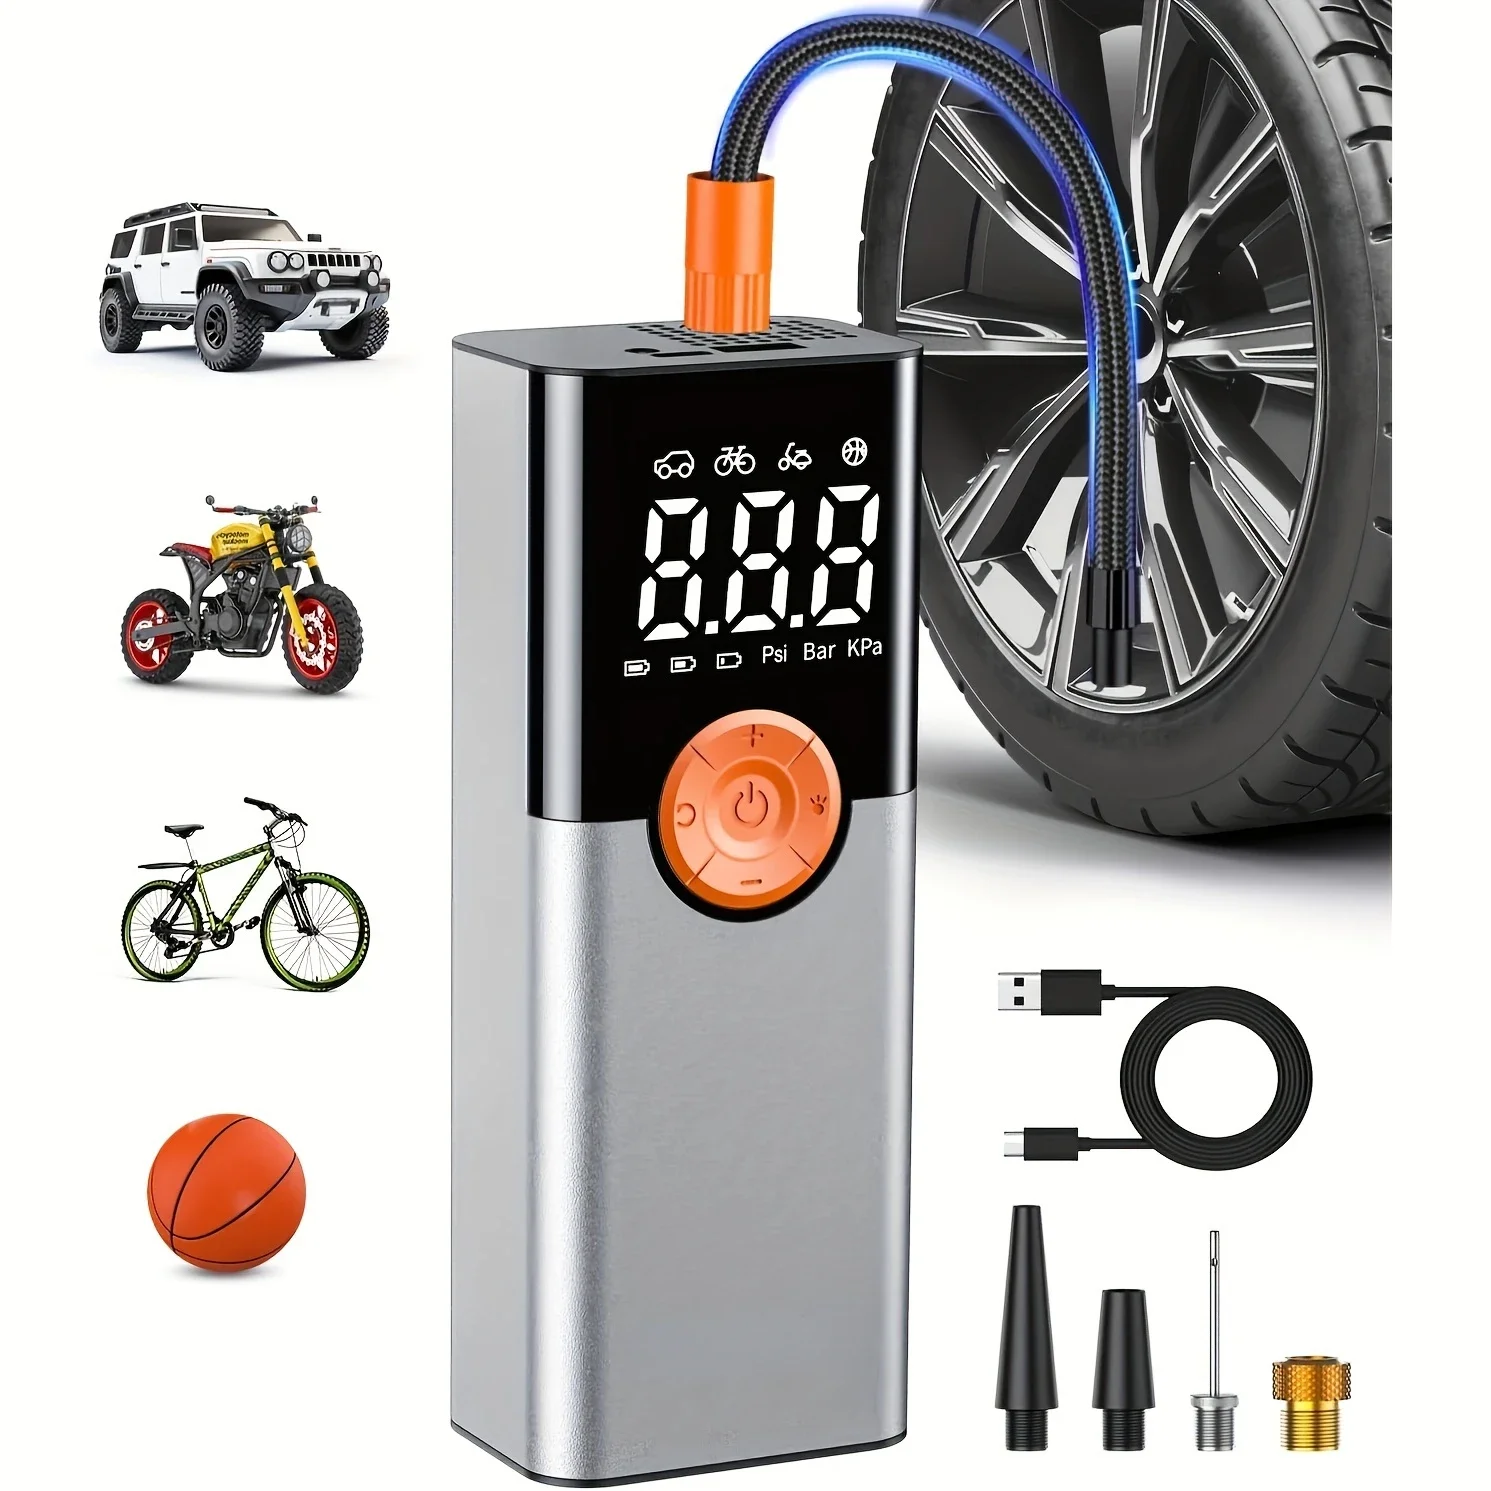 

Versatile Compact 150 PSI Tire Inflator with Digital Pressure Gauge, LED Light - Efficient Air Compressor for Cars, Motorcycles,